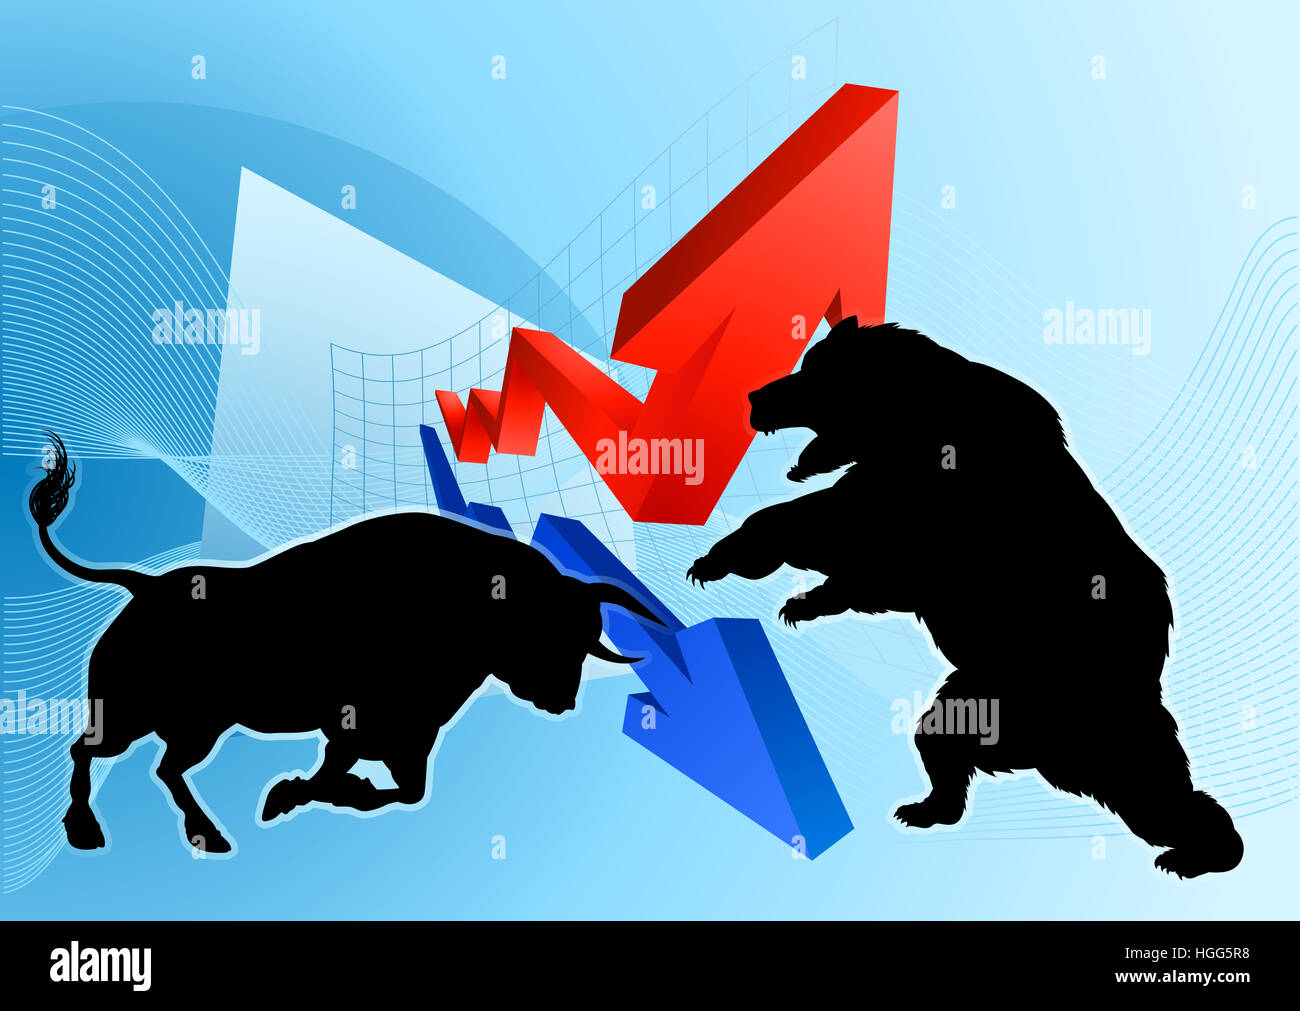 A silhouette bear fighting a bull mascot characters in front of a stock market or profit graph financial concept Stock Photo